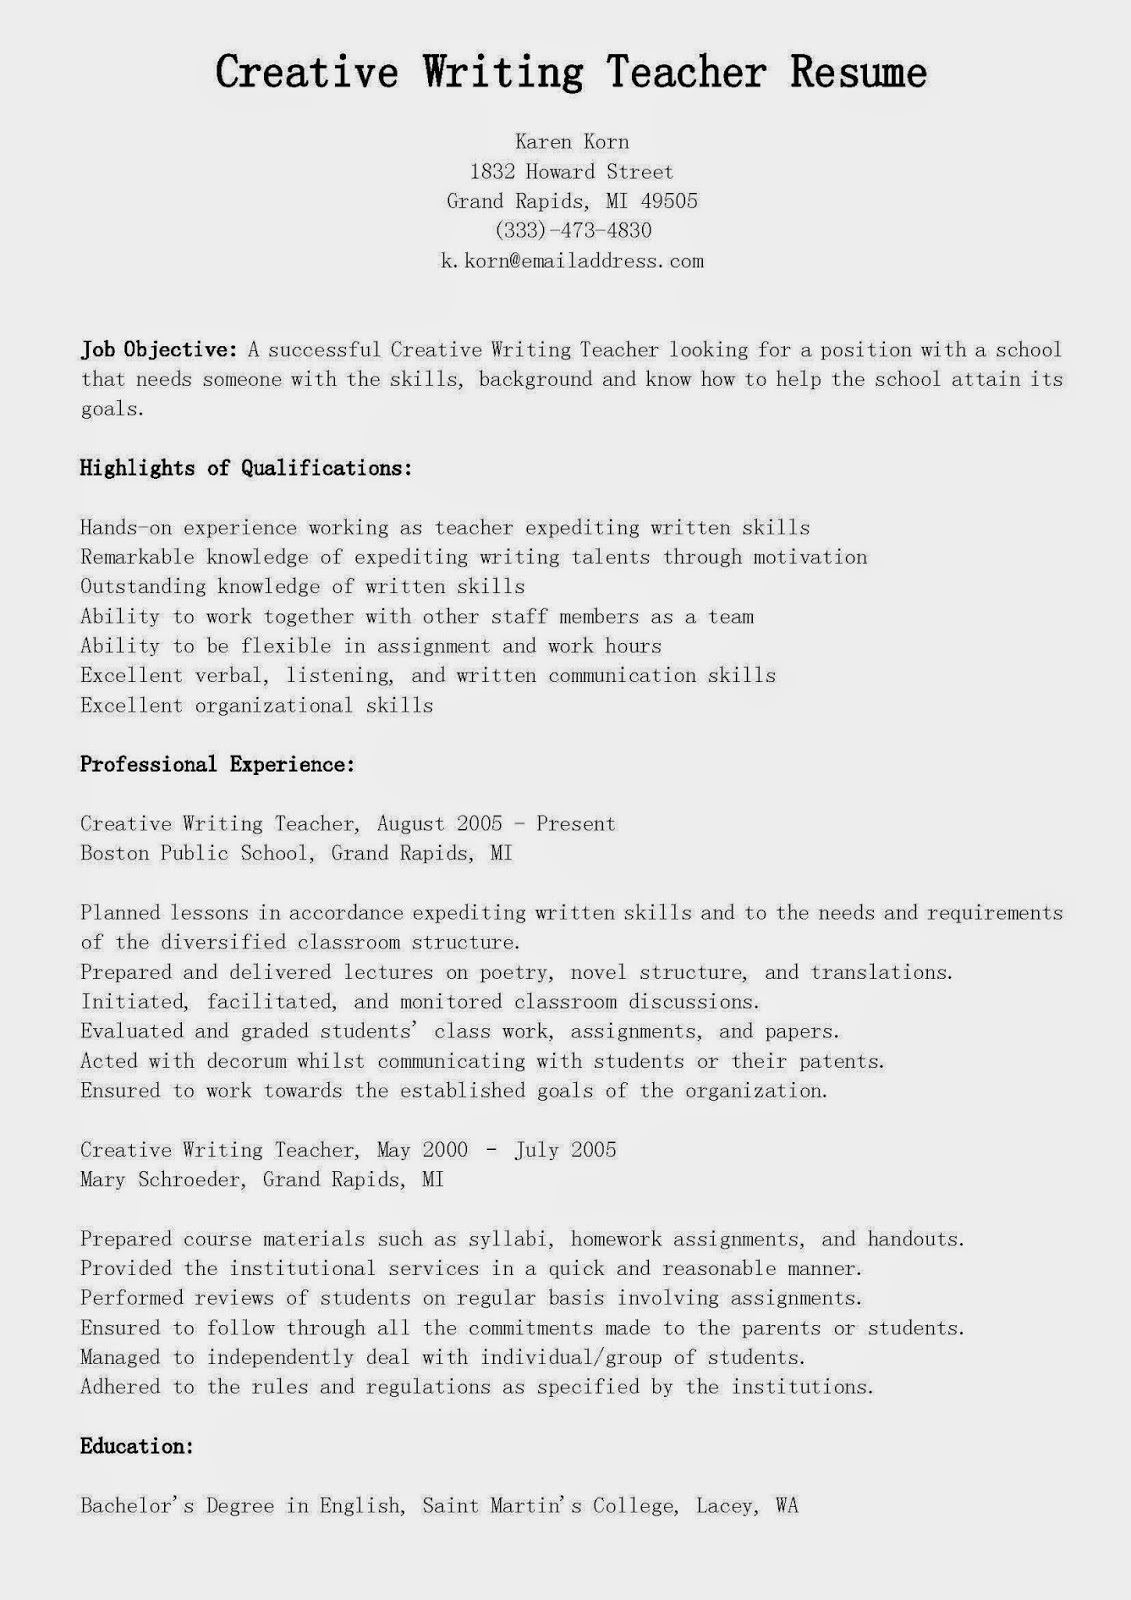 How to make a resume for teaching